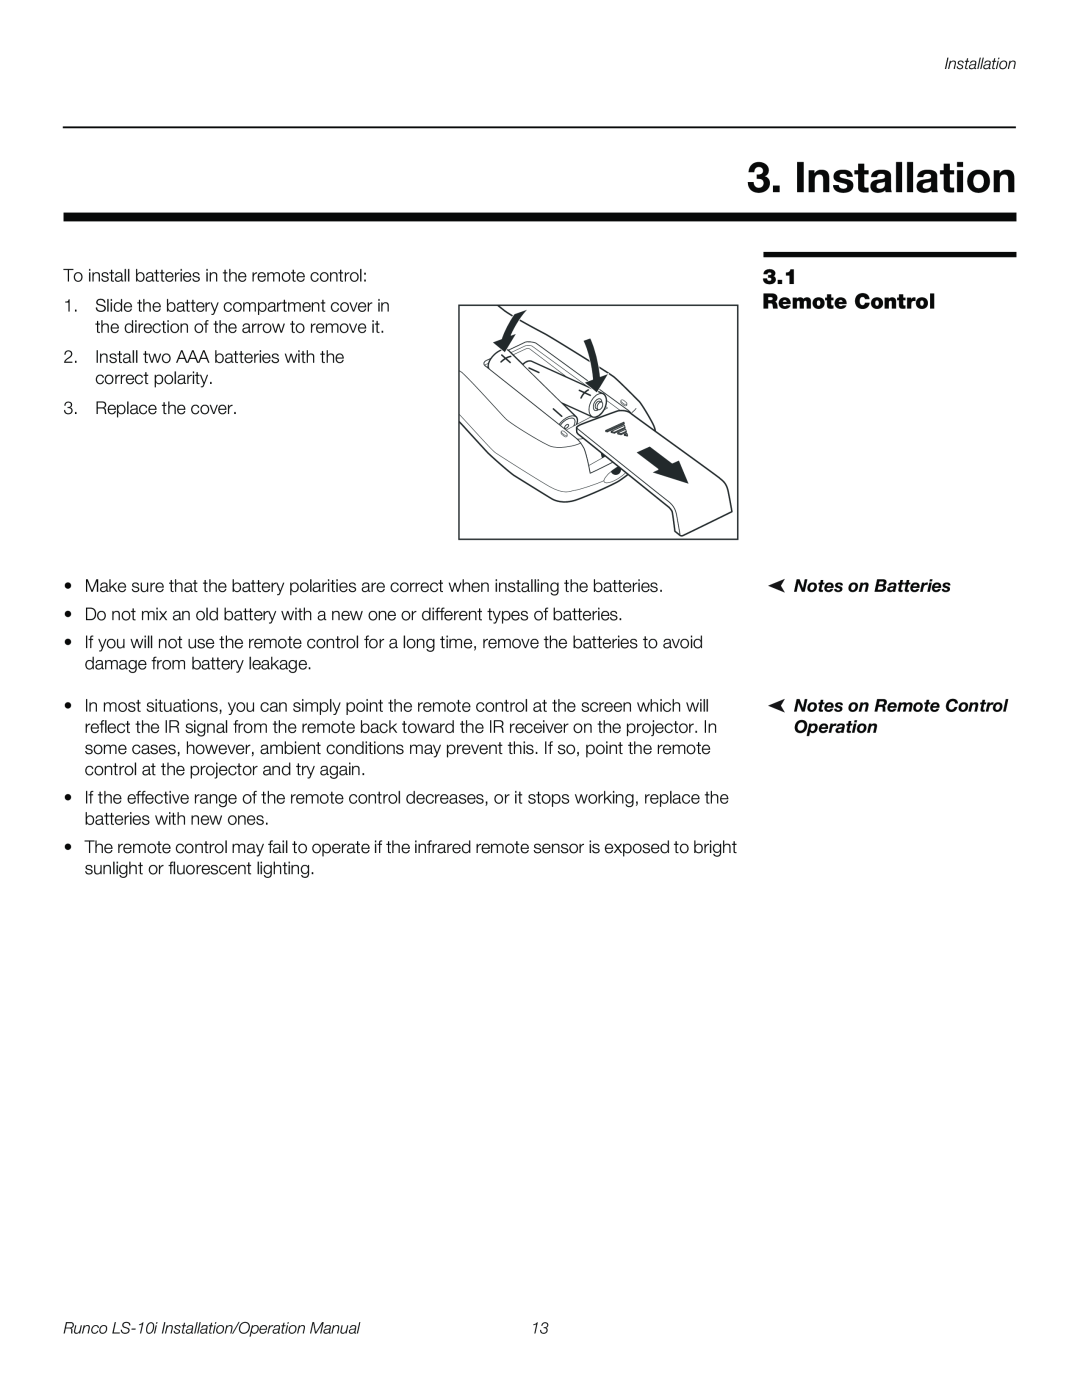 Runco LS-10I operation manual Installation, Notes on Batteries, Notes on Remote Control Operation 